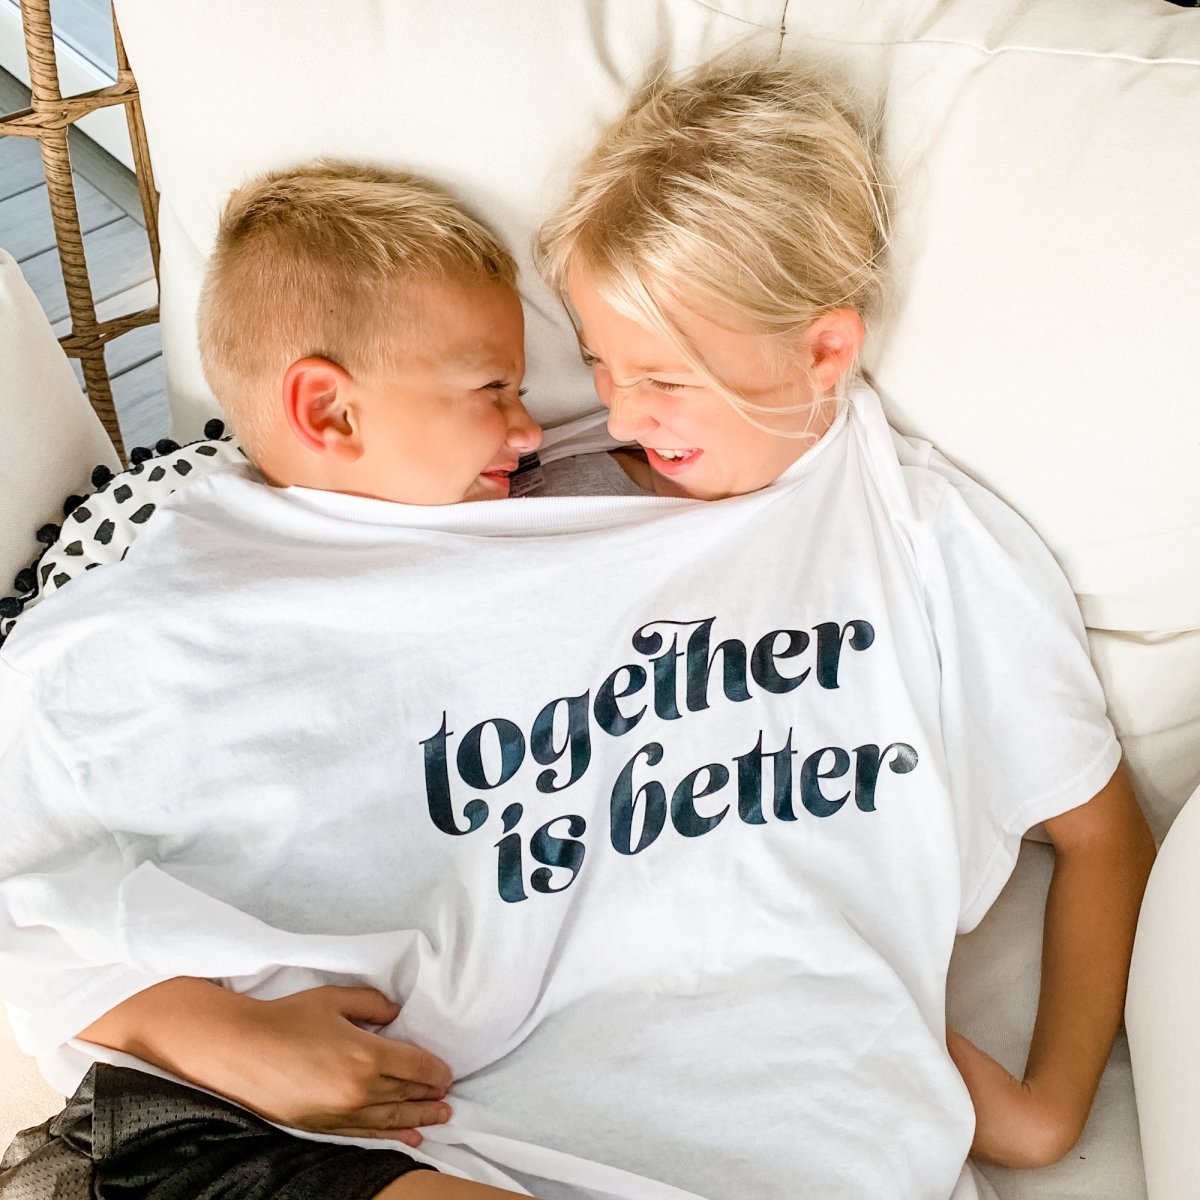 Together is Better Shirt | Kids - sonder and wolf